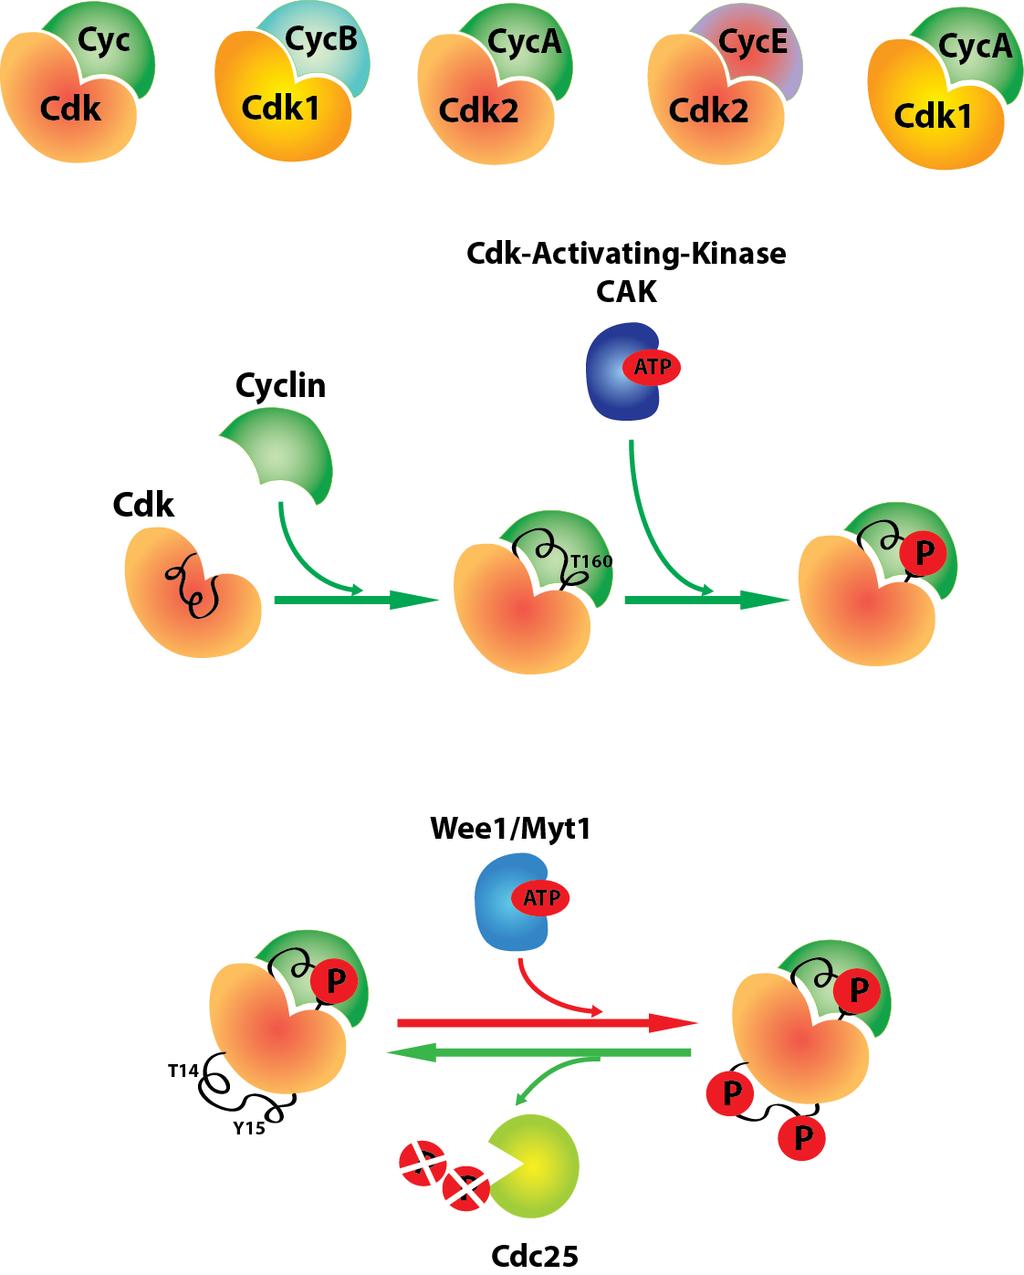 Post-translational modifications A crucial regulatory step of Cyclin-Cdk complexes activity comes from the balanced action of phosphatases and kinases.